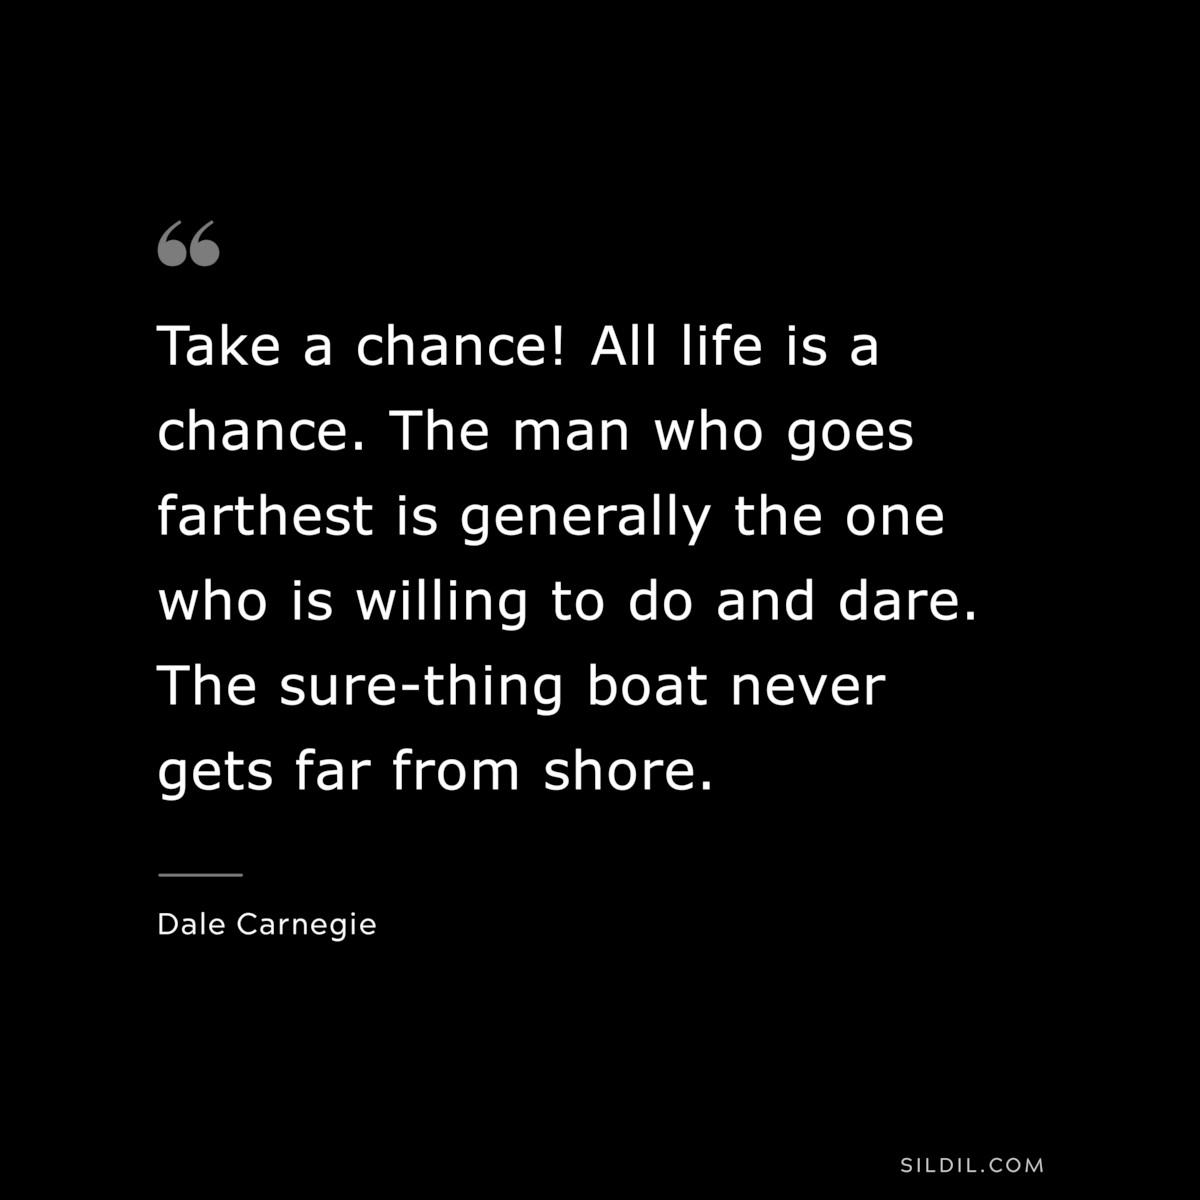 Take a chance! All life is a chance. The man who goes farthest is generally the one who is willing to do and dare. The sure-thing boat never gets far from shore.― Dale Carnegie